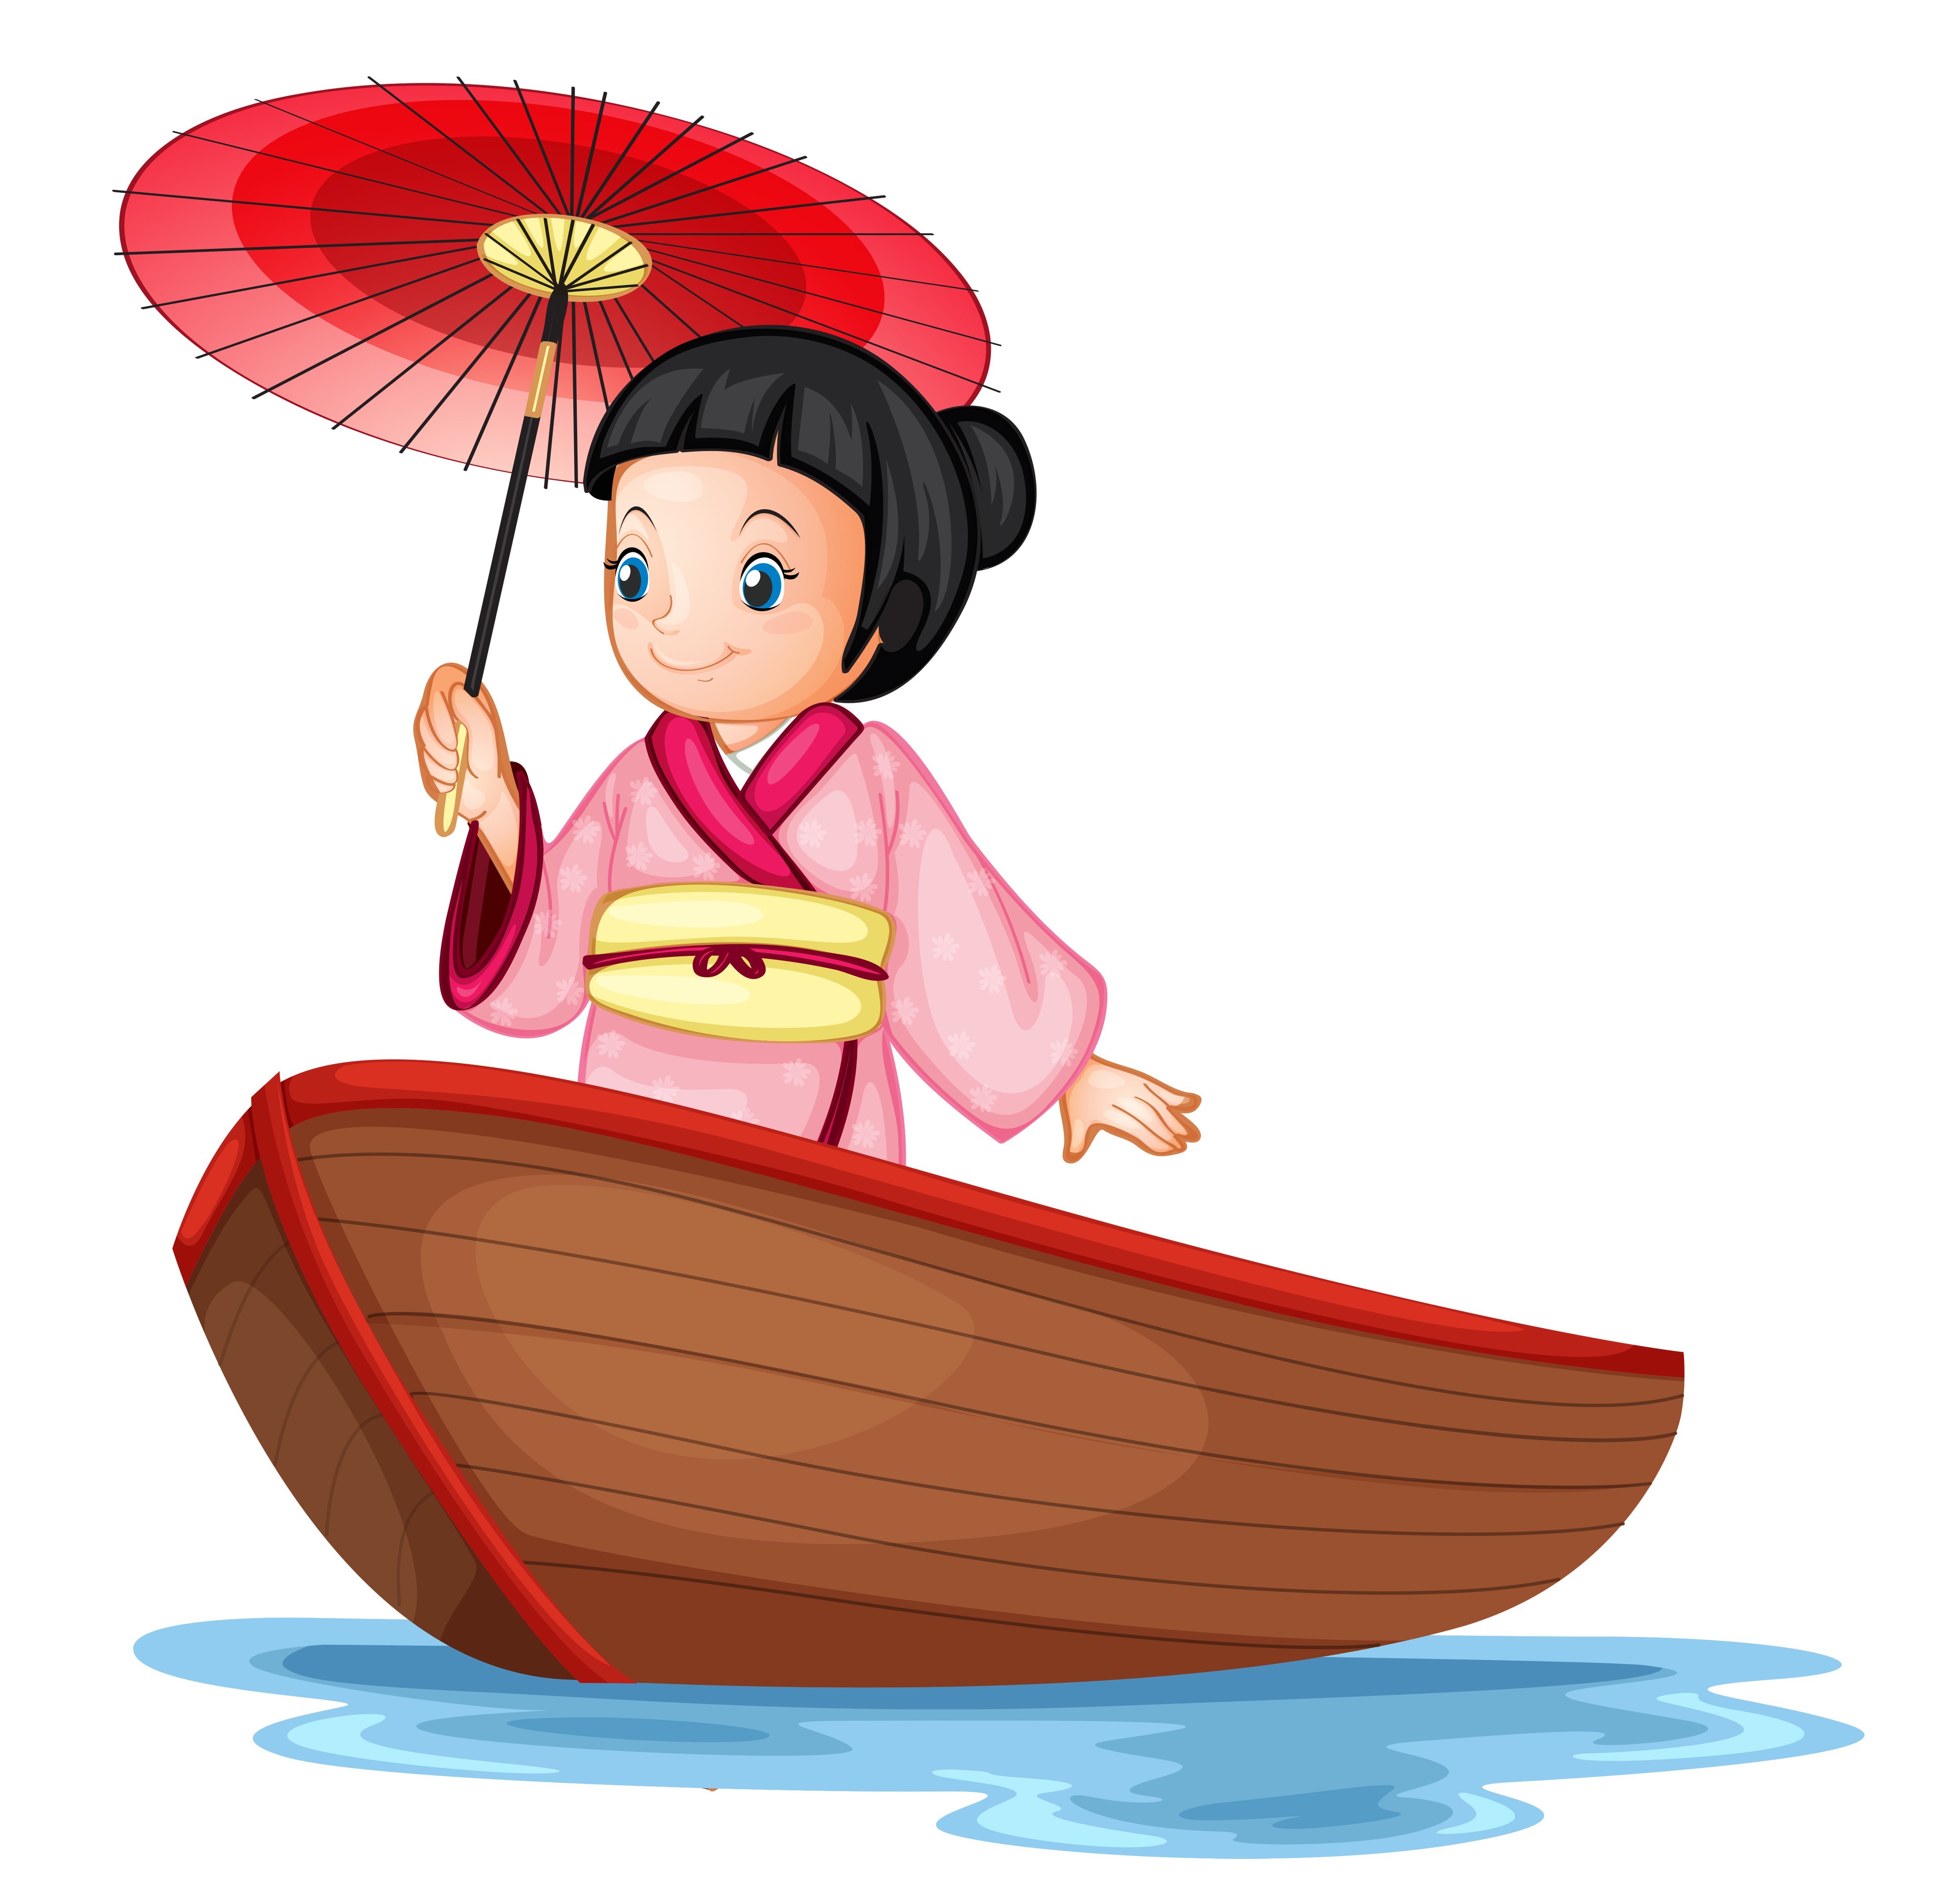 A Japanese Girl On Wooden Boat Download Free Vectors Clipart Graphics Vector Art